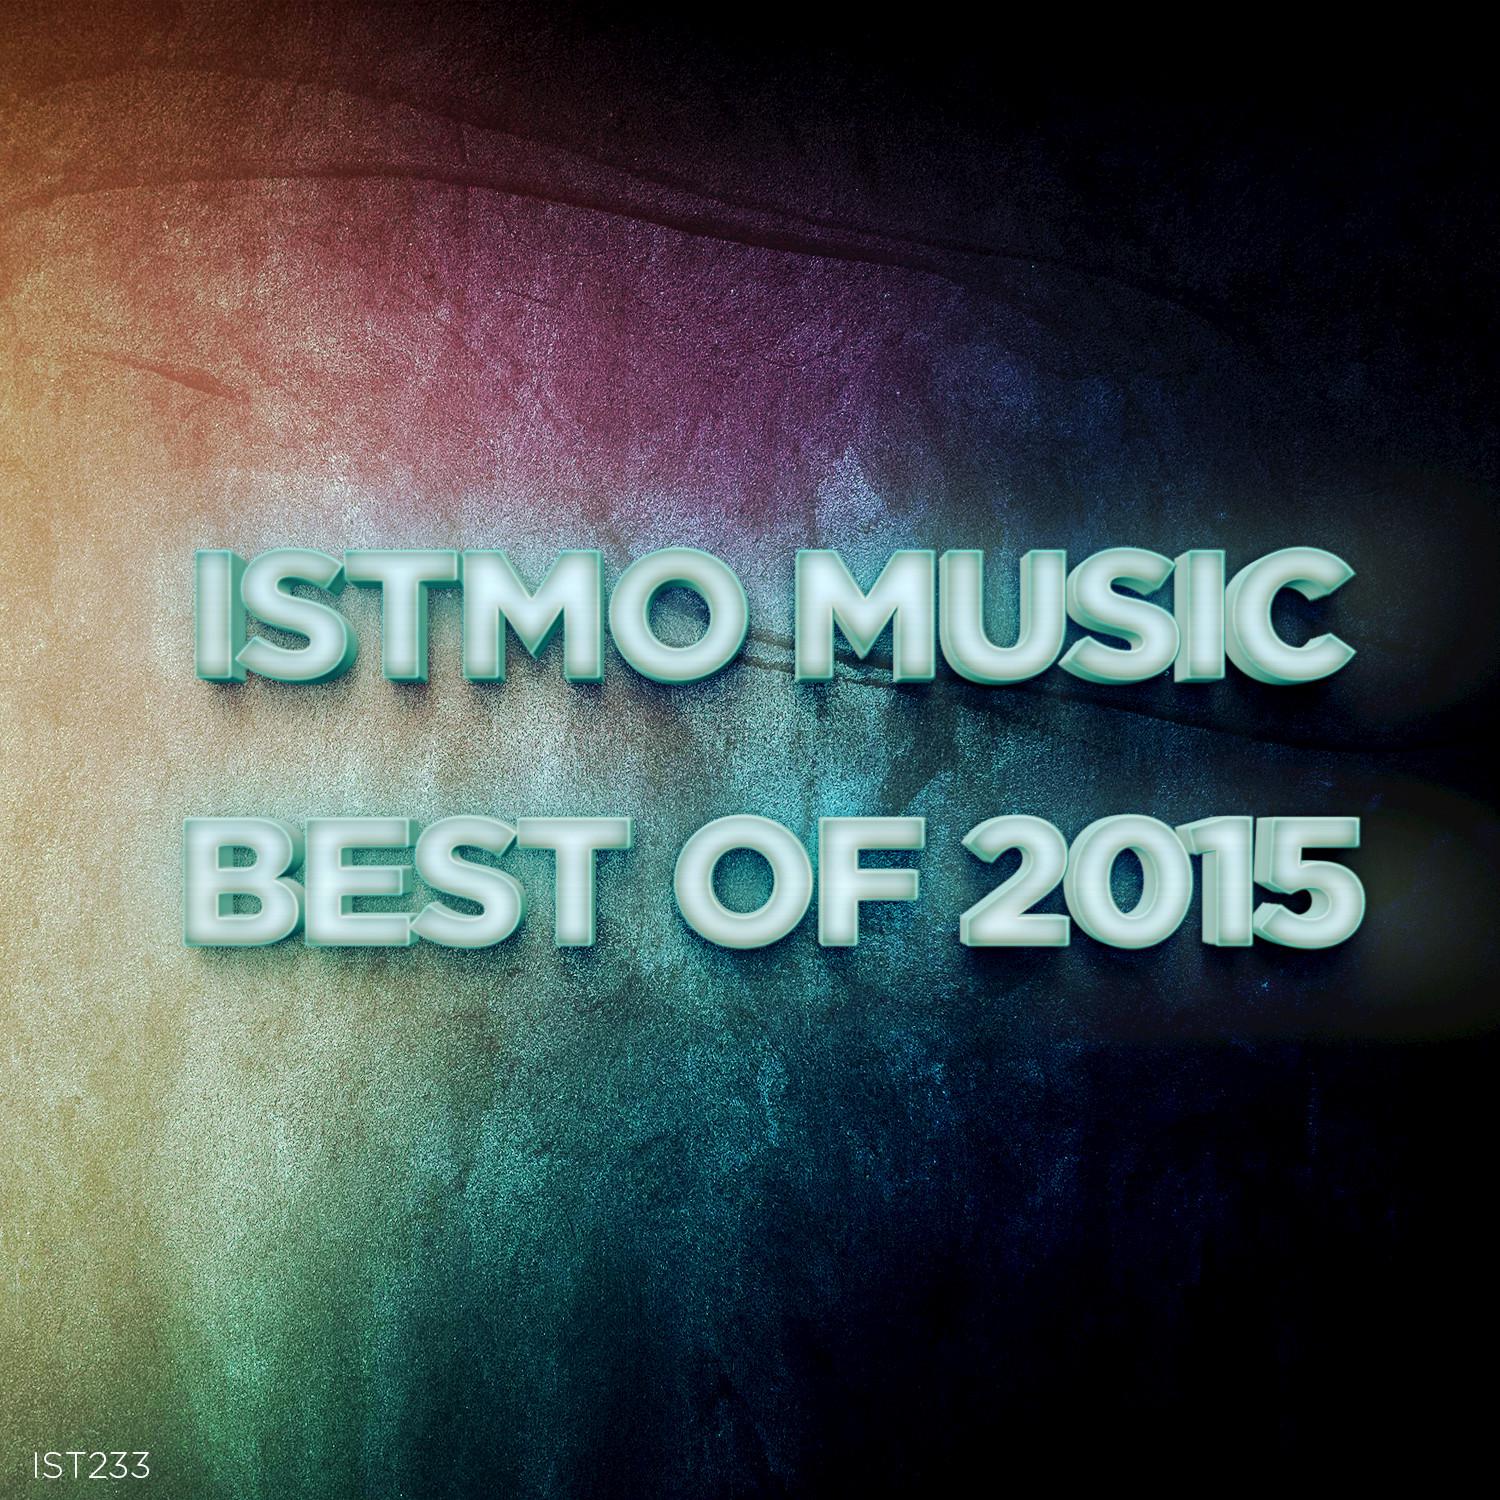 Istmo Music Best of 2015 (Continuous DJ Mix)